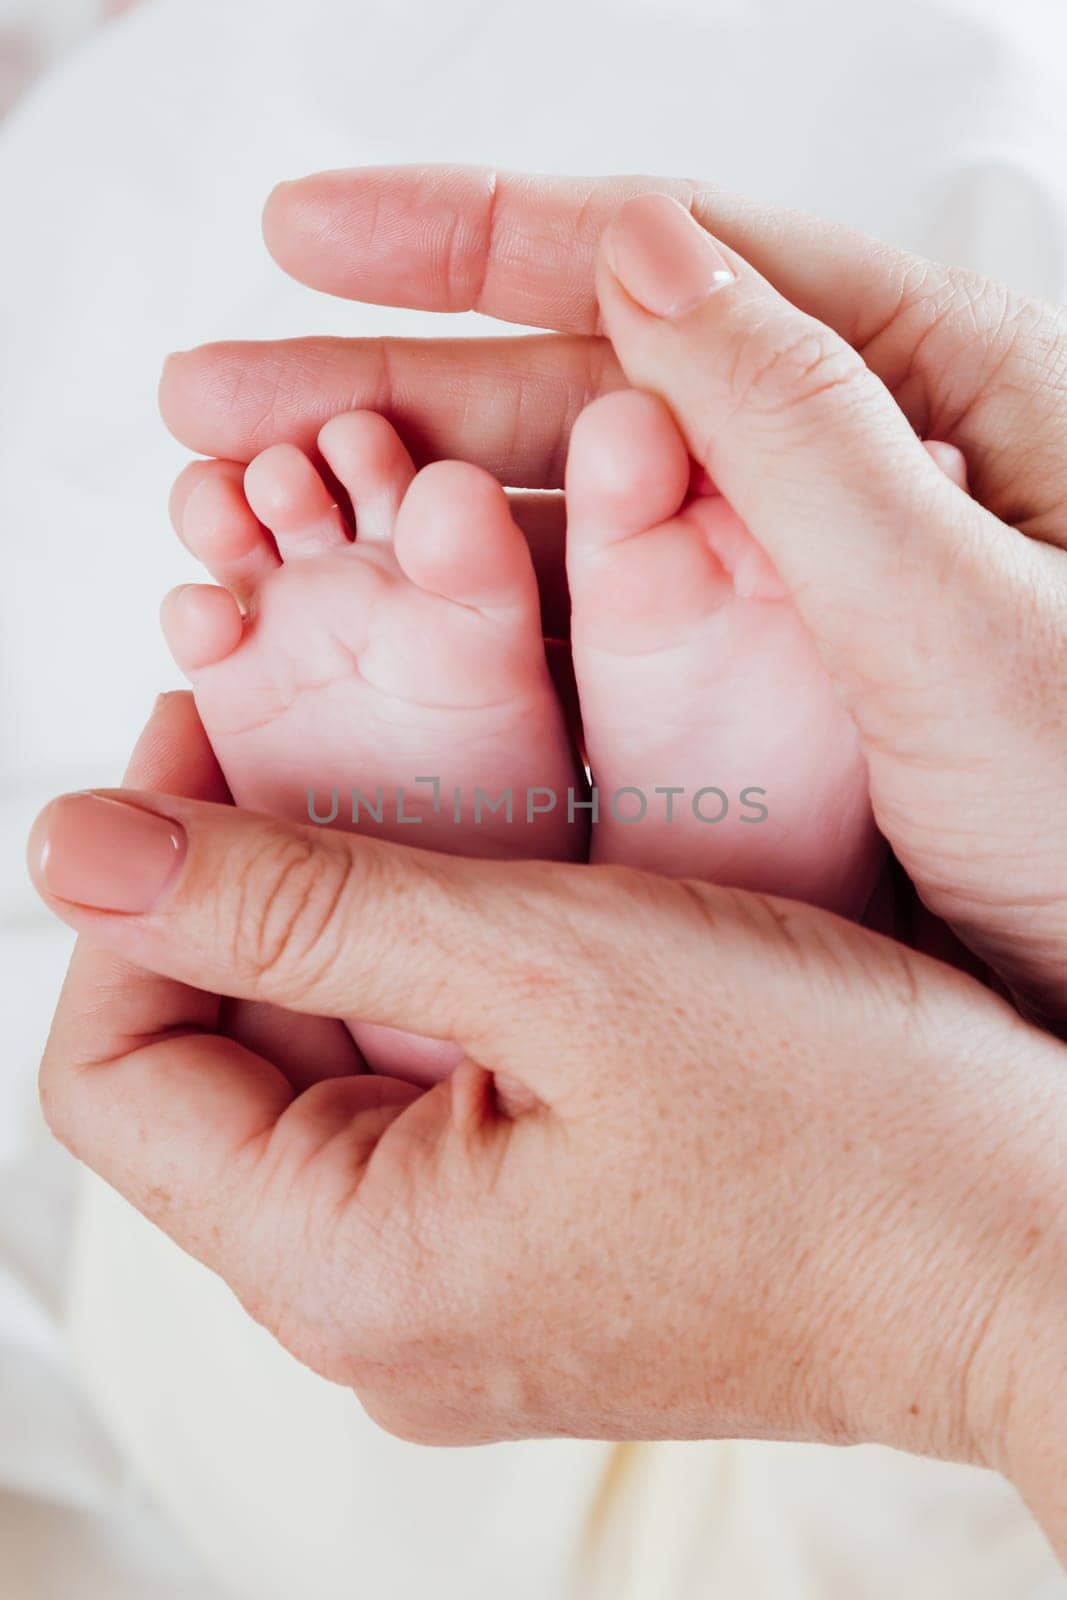 mom's hands hold the feet toes baby